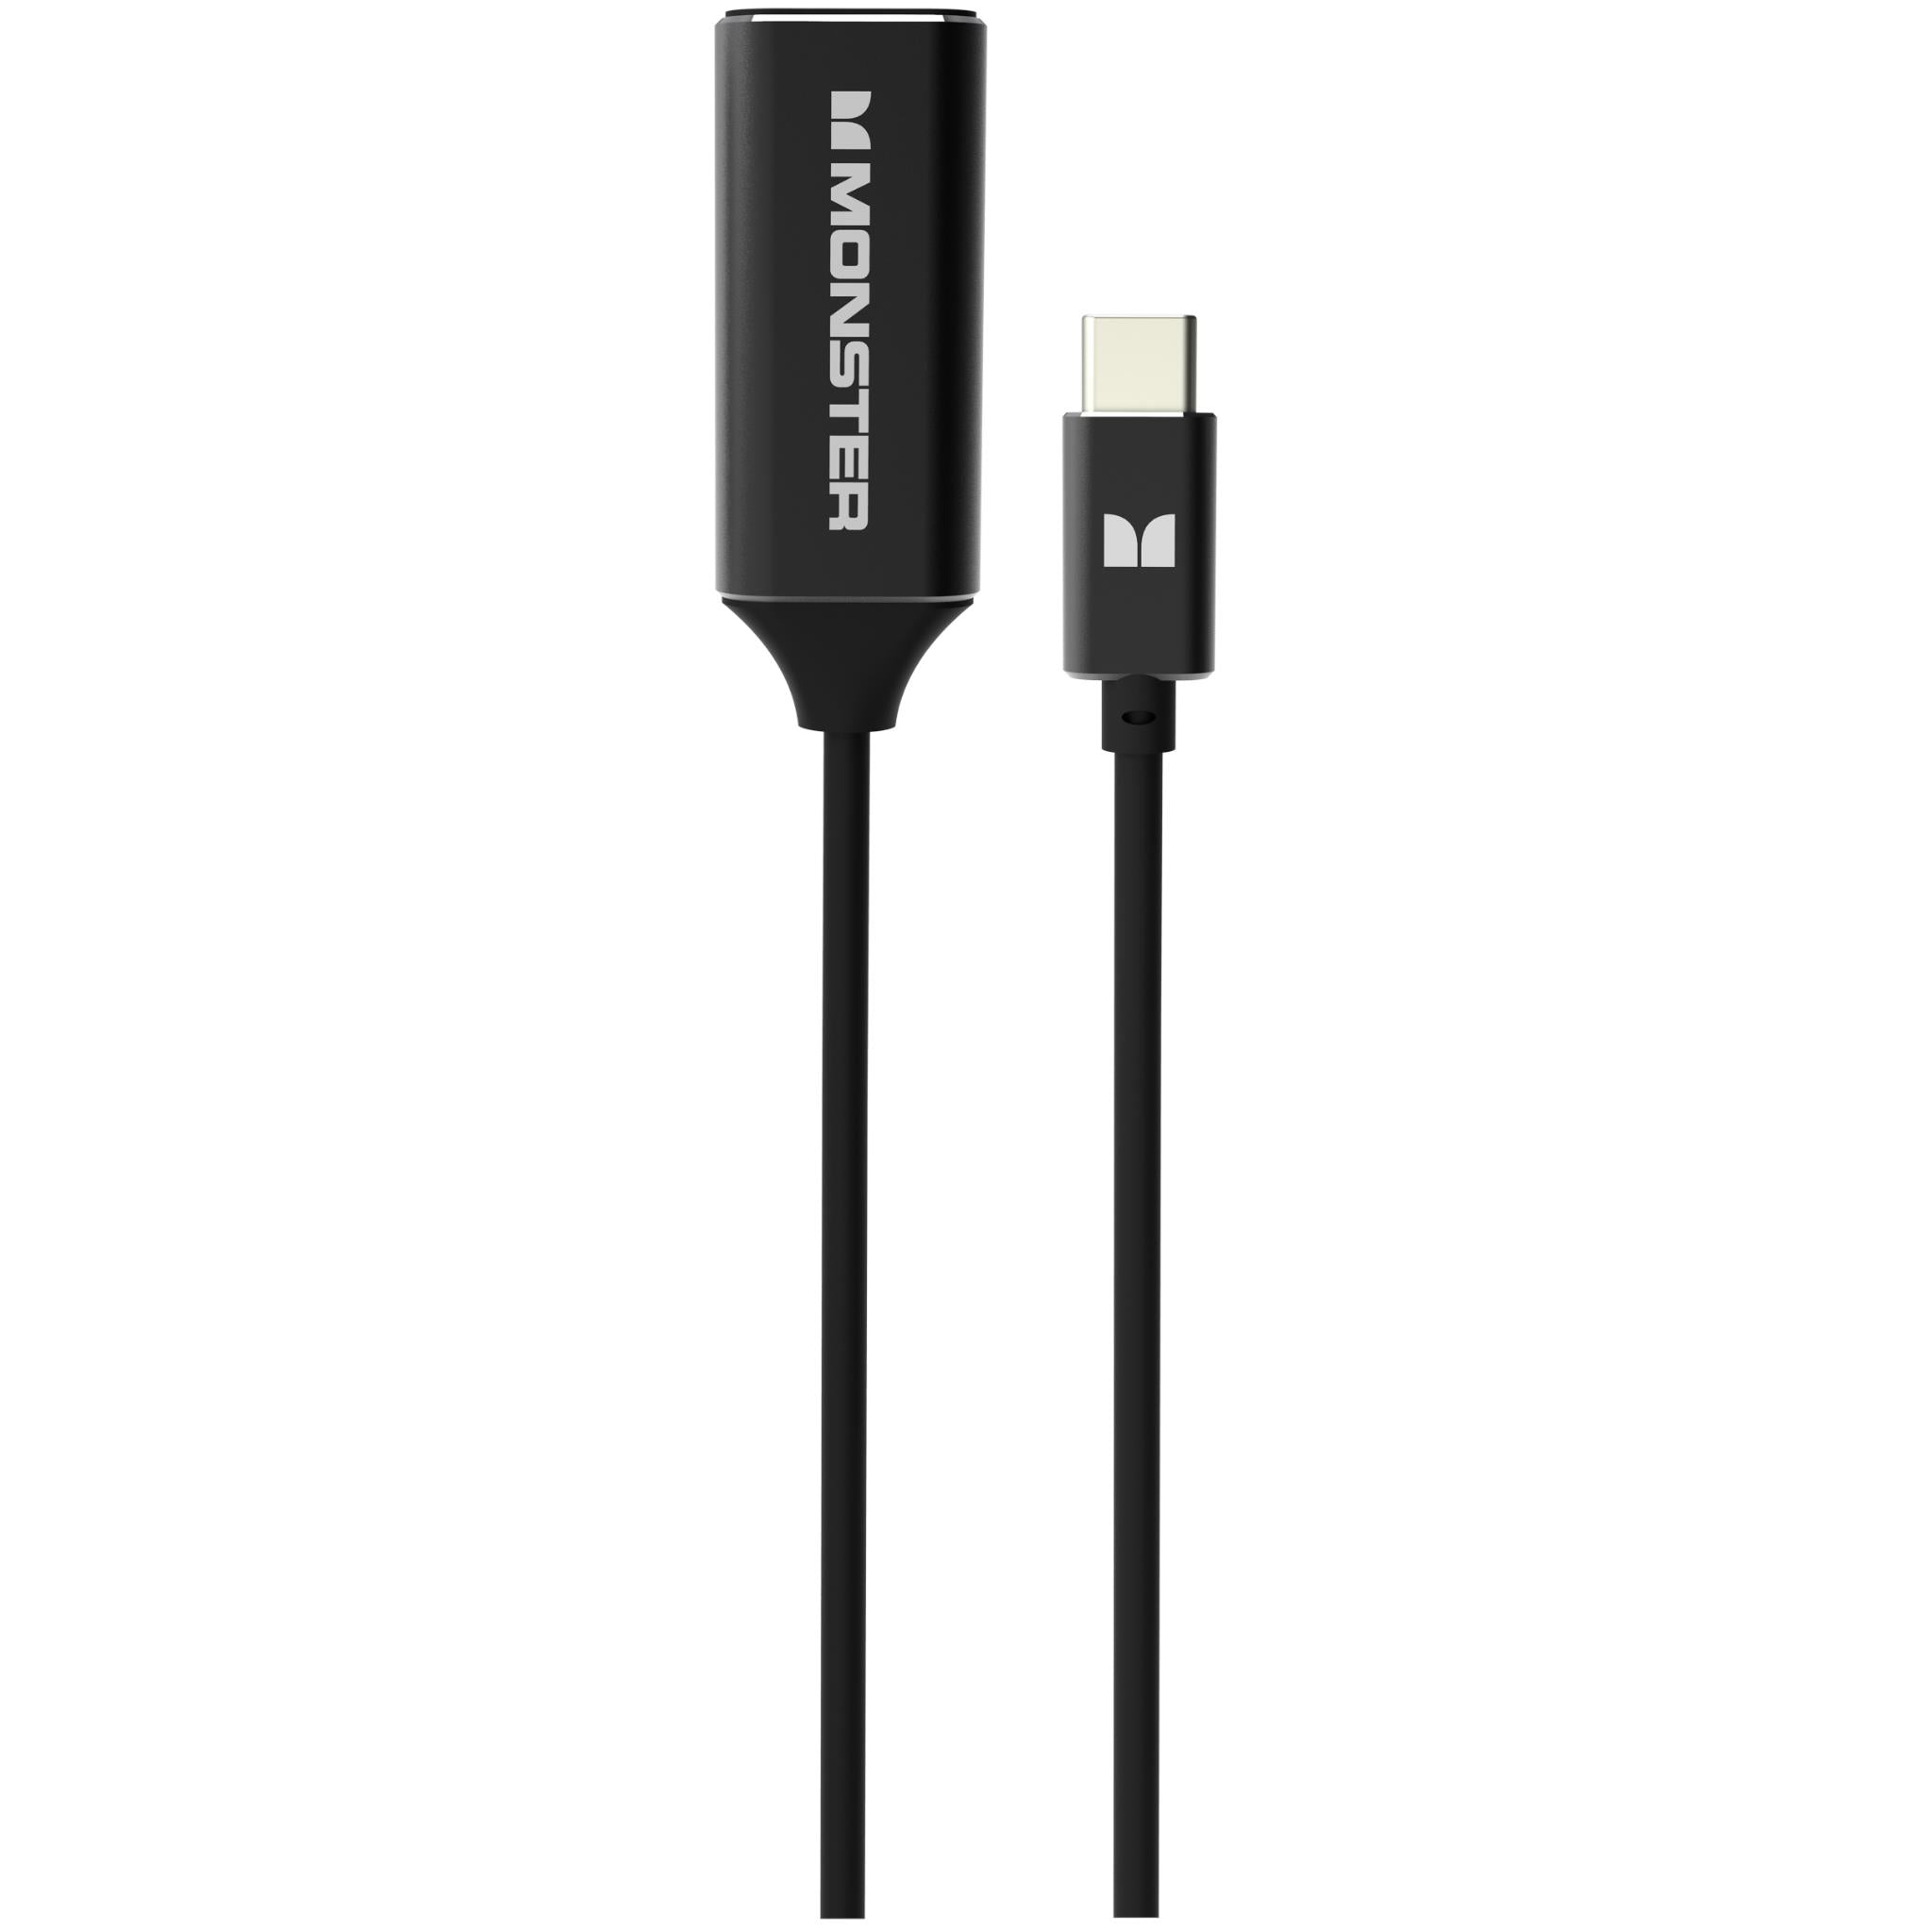 monster usb type-c plug to 4k hdmi adapter 15cm